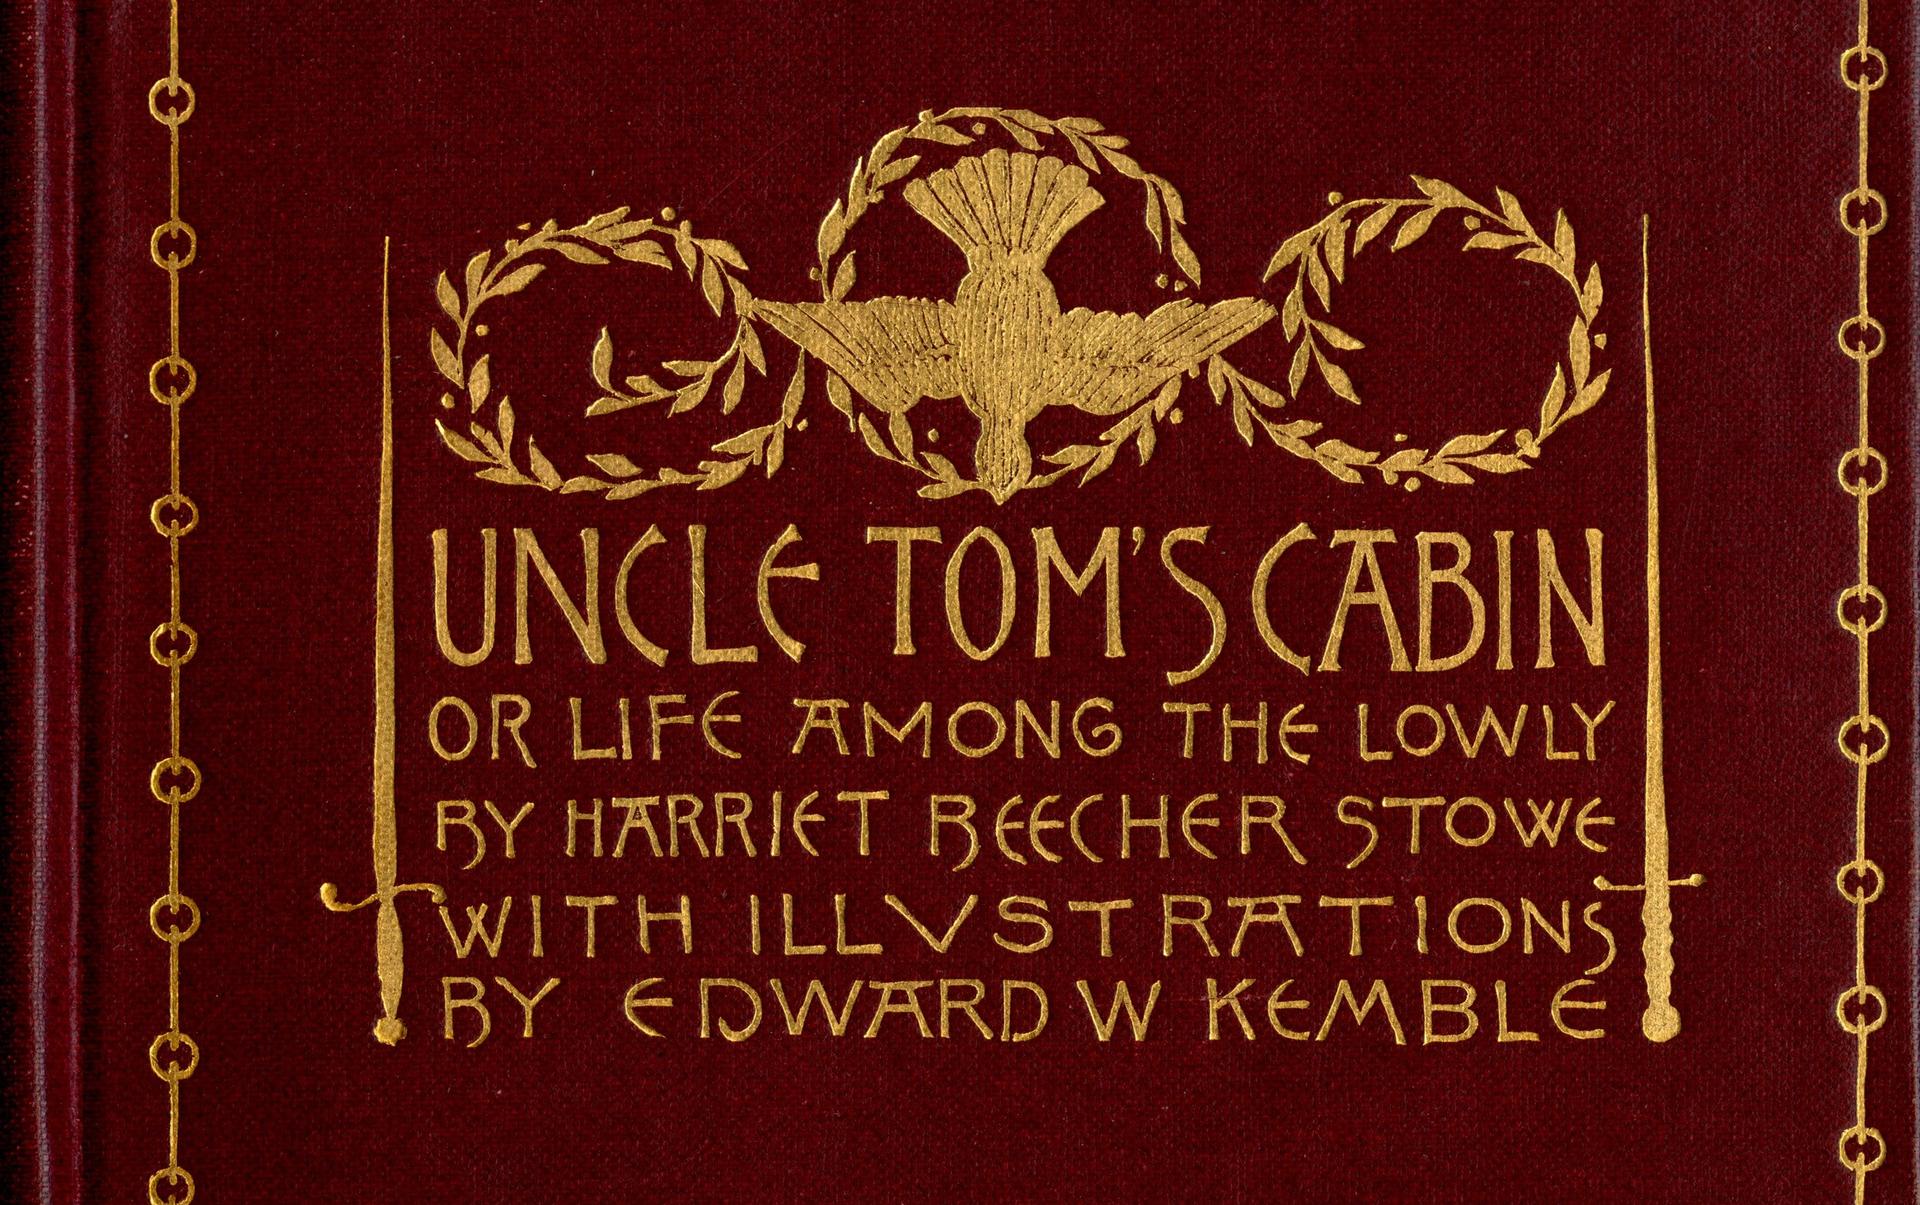 Cover to “Uncle Tom's Cabin,” 1892